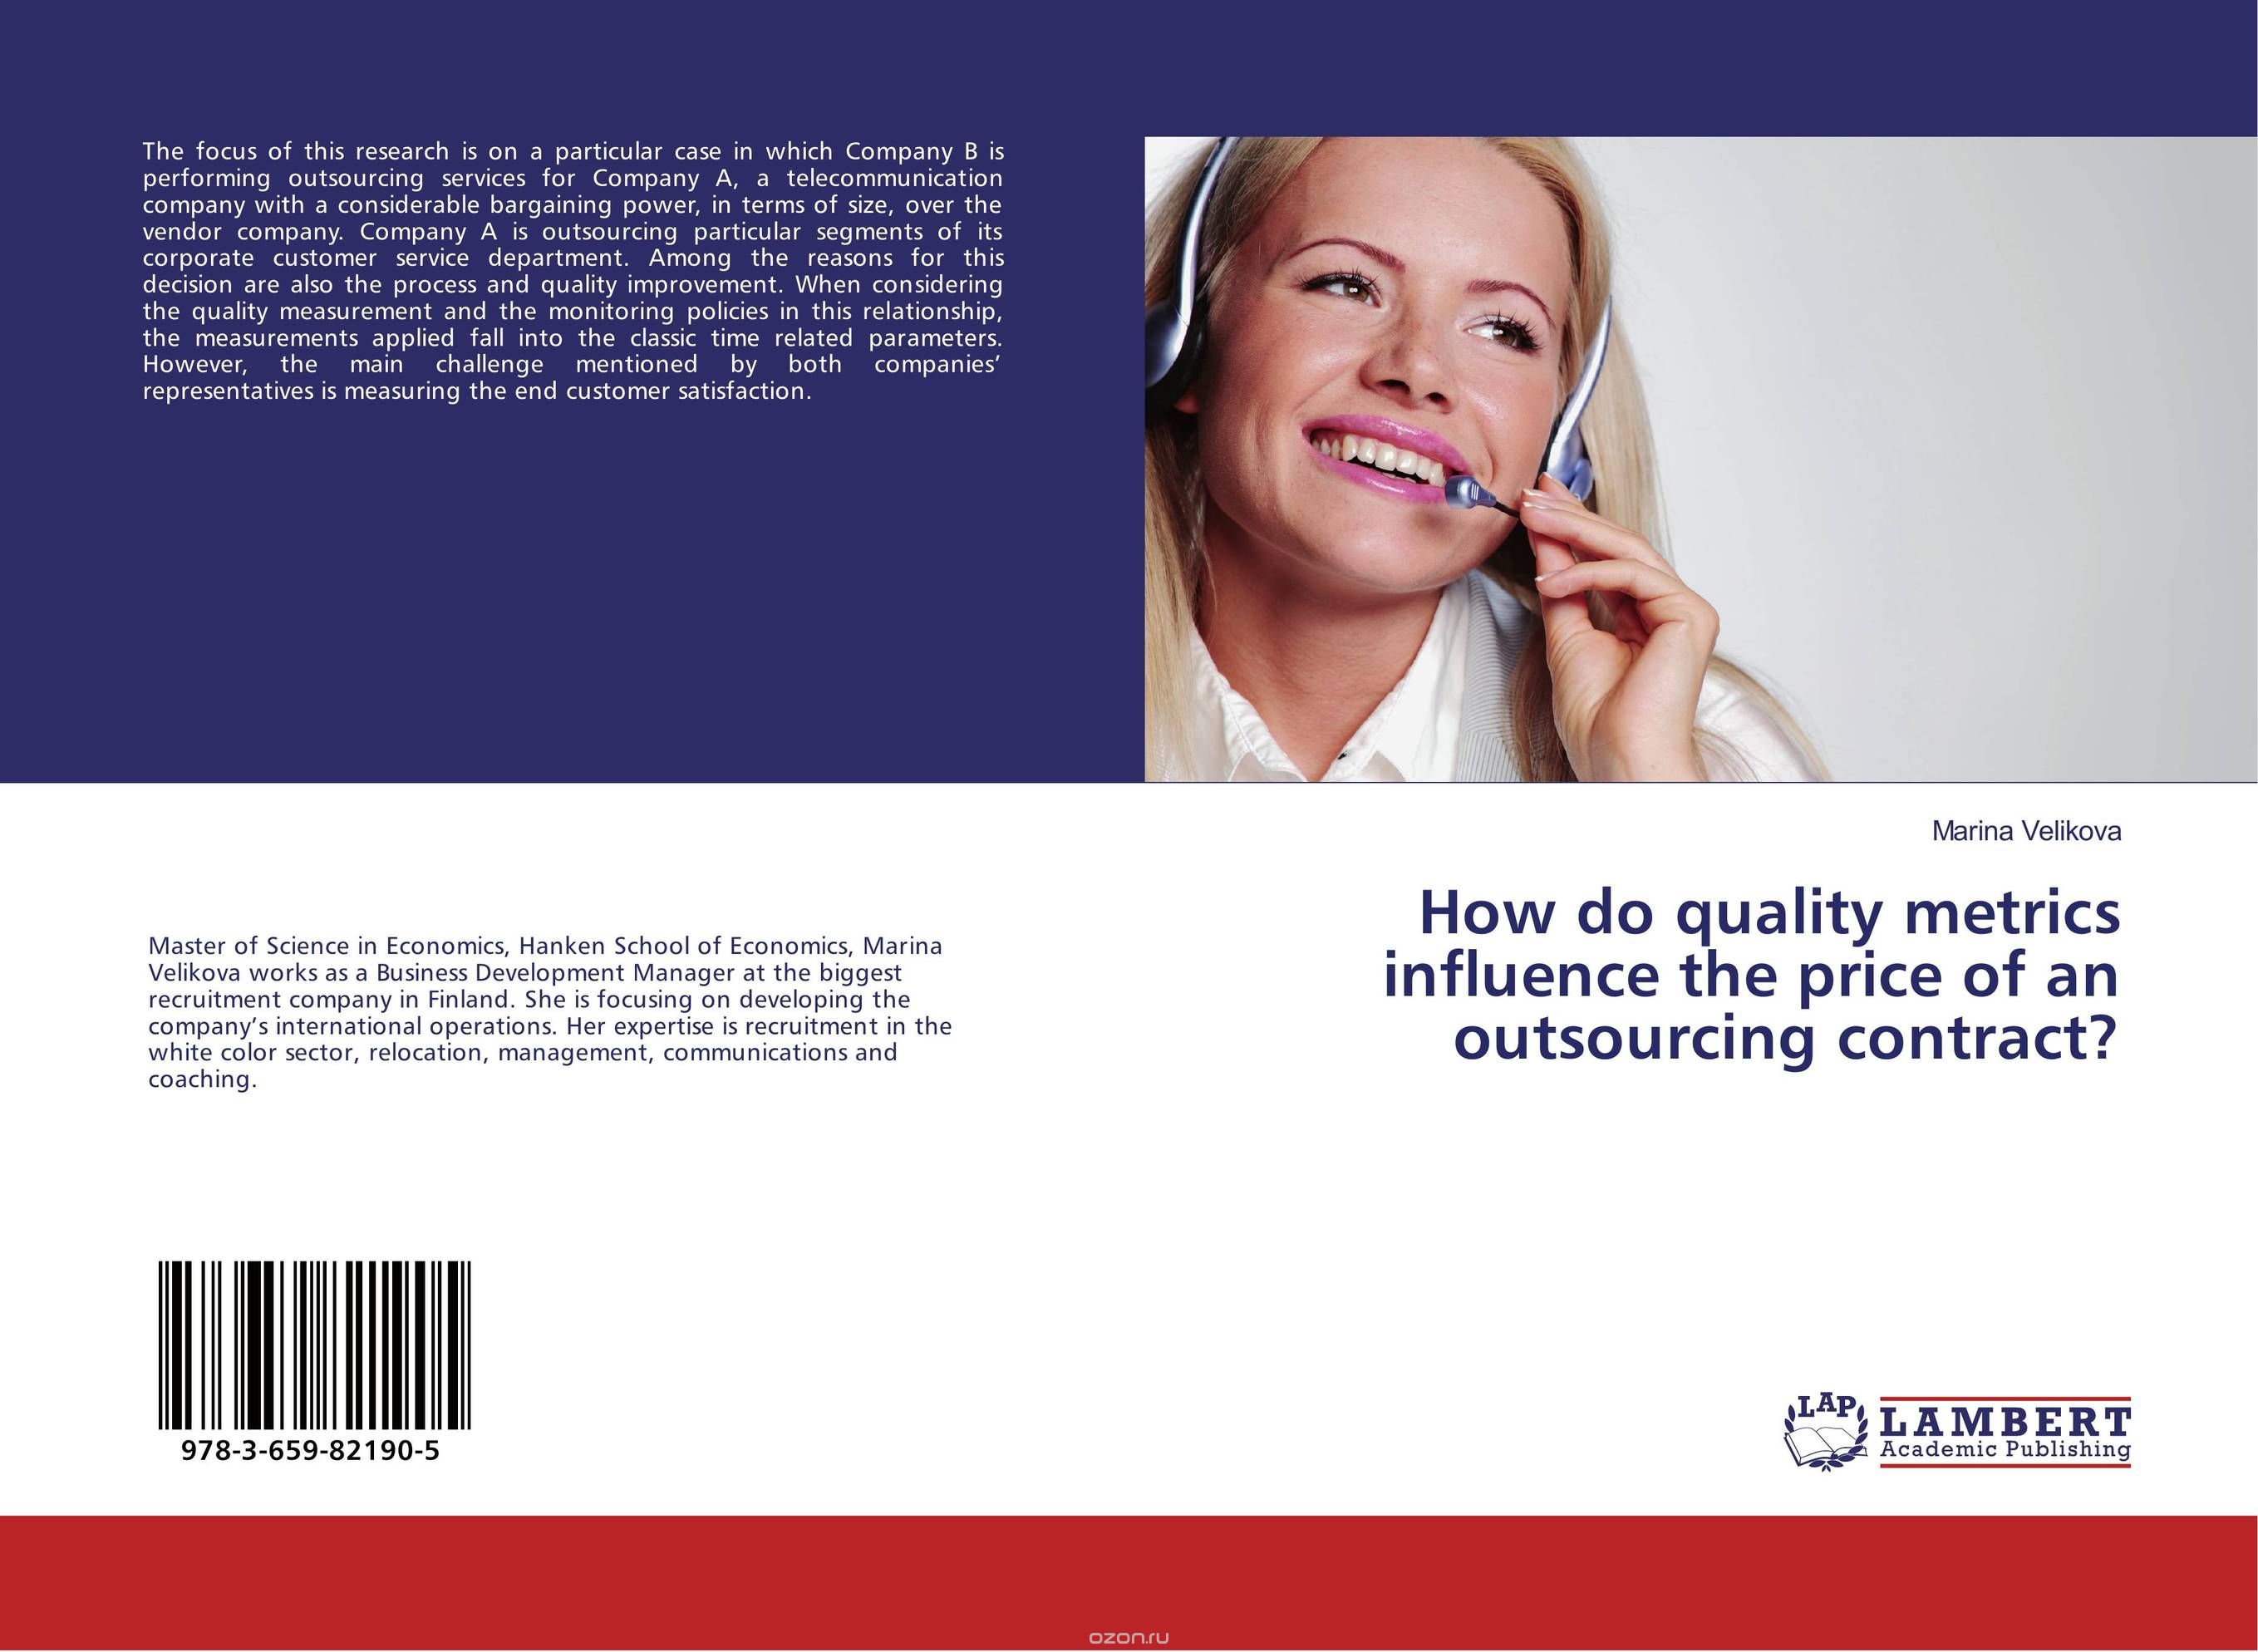 How do quality metrics influence the price of an outsourcing contract?